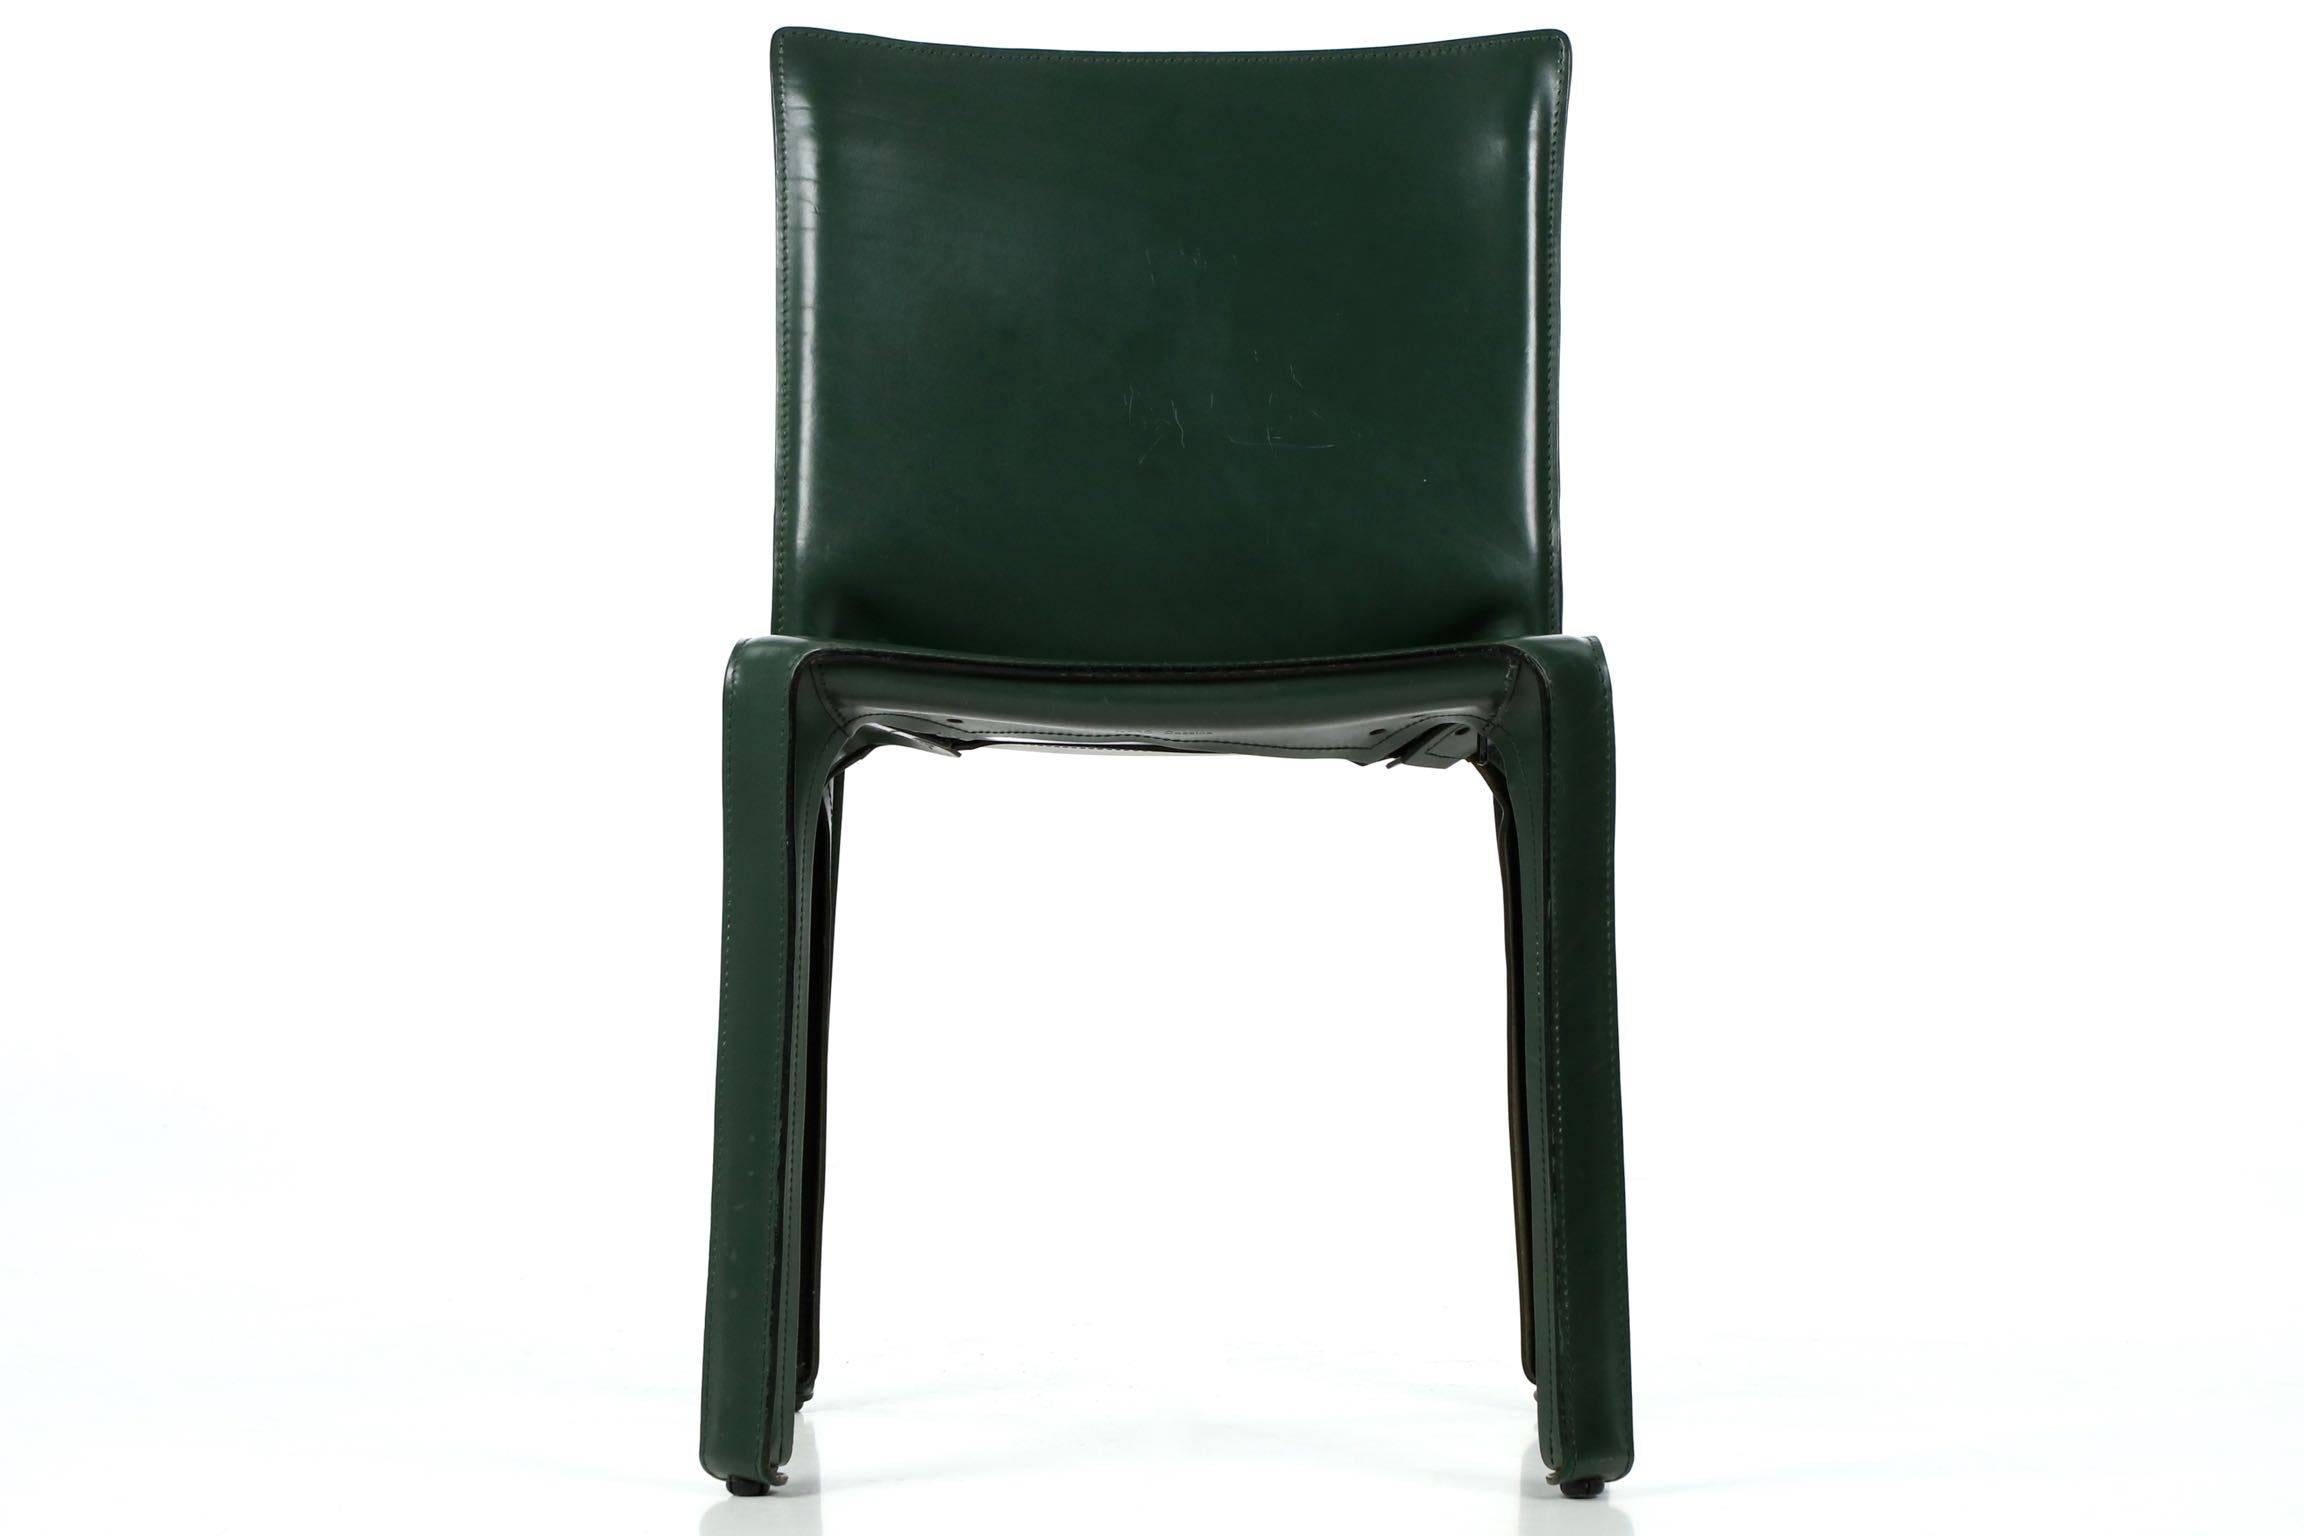 “Cab” Green saddle leather side chair by Mario Bellini for Cassina.
Circa, third quarter of the 20th century, impressed 